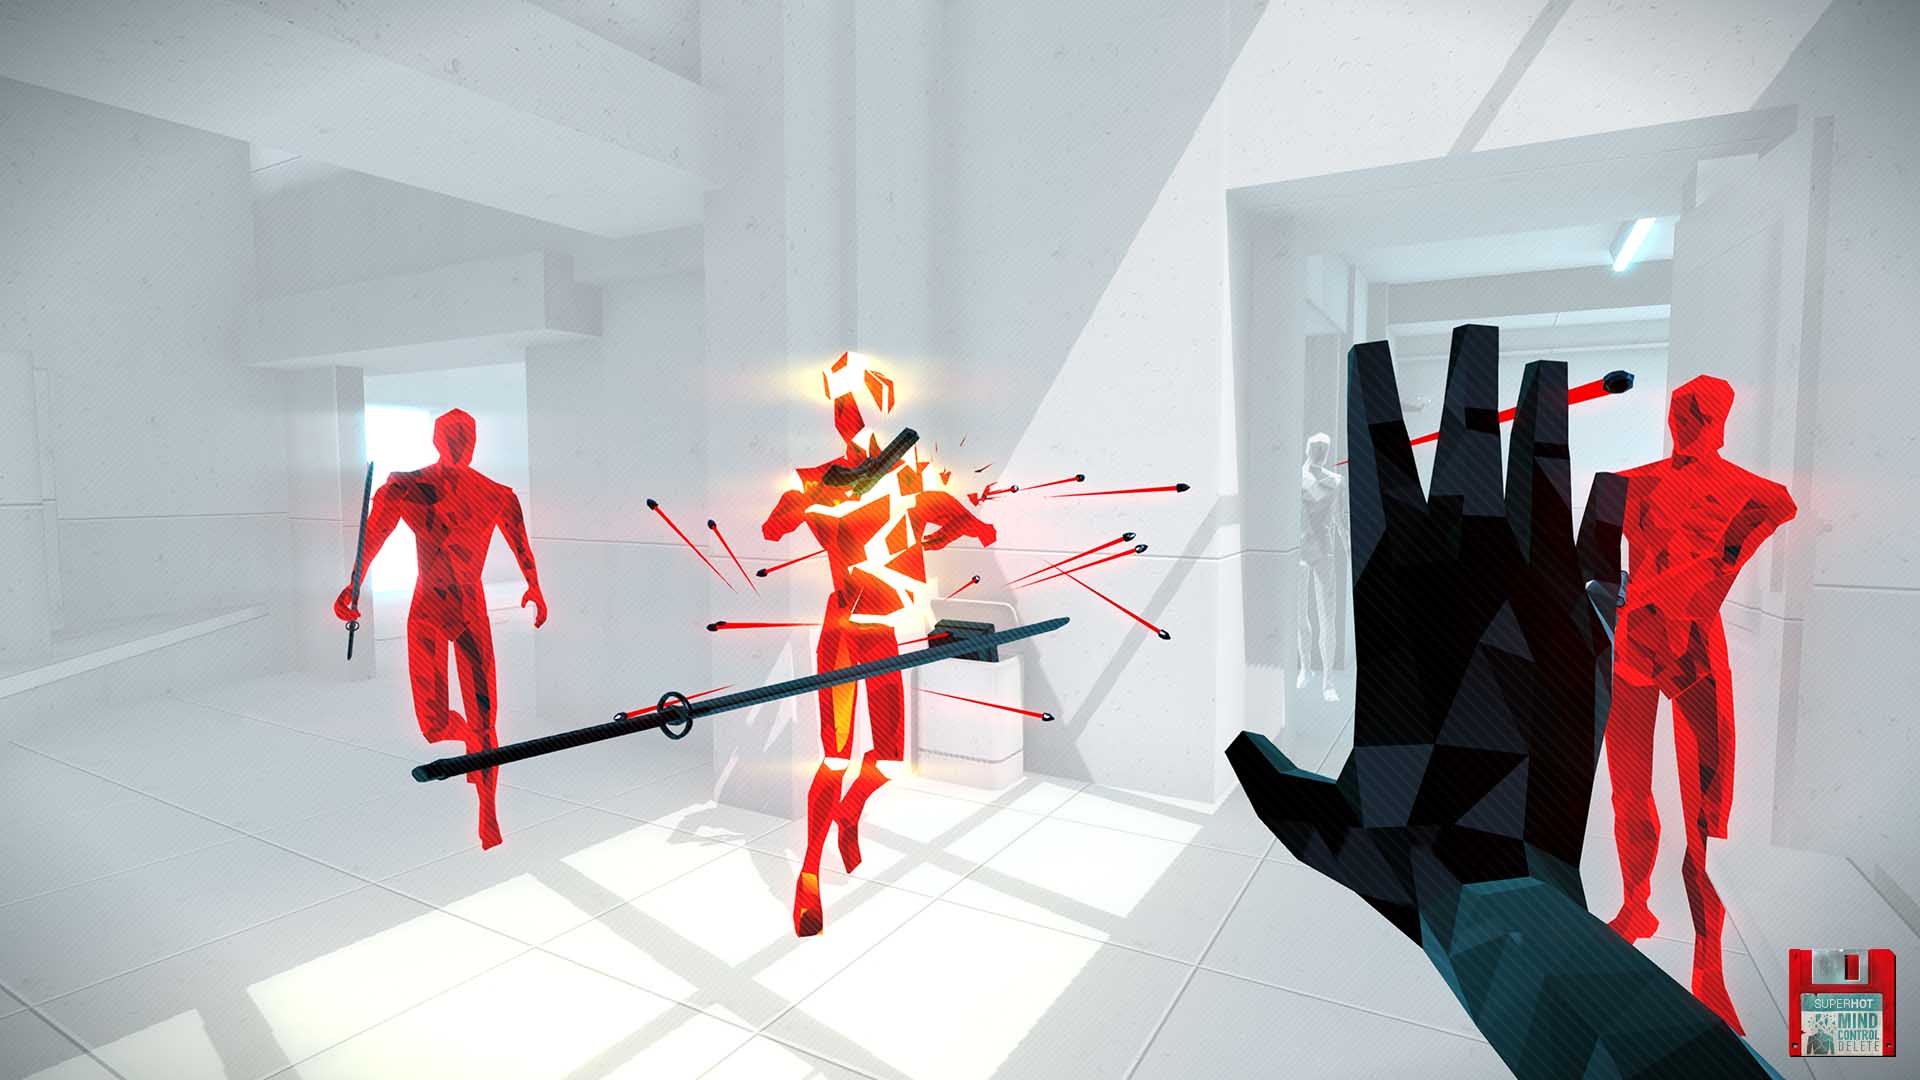 Best PS VR games: A man uses his hand to control his enemies